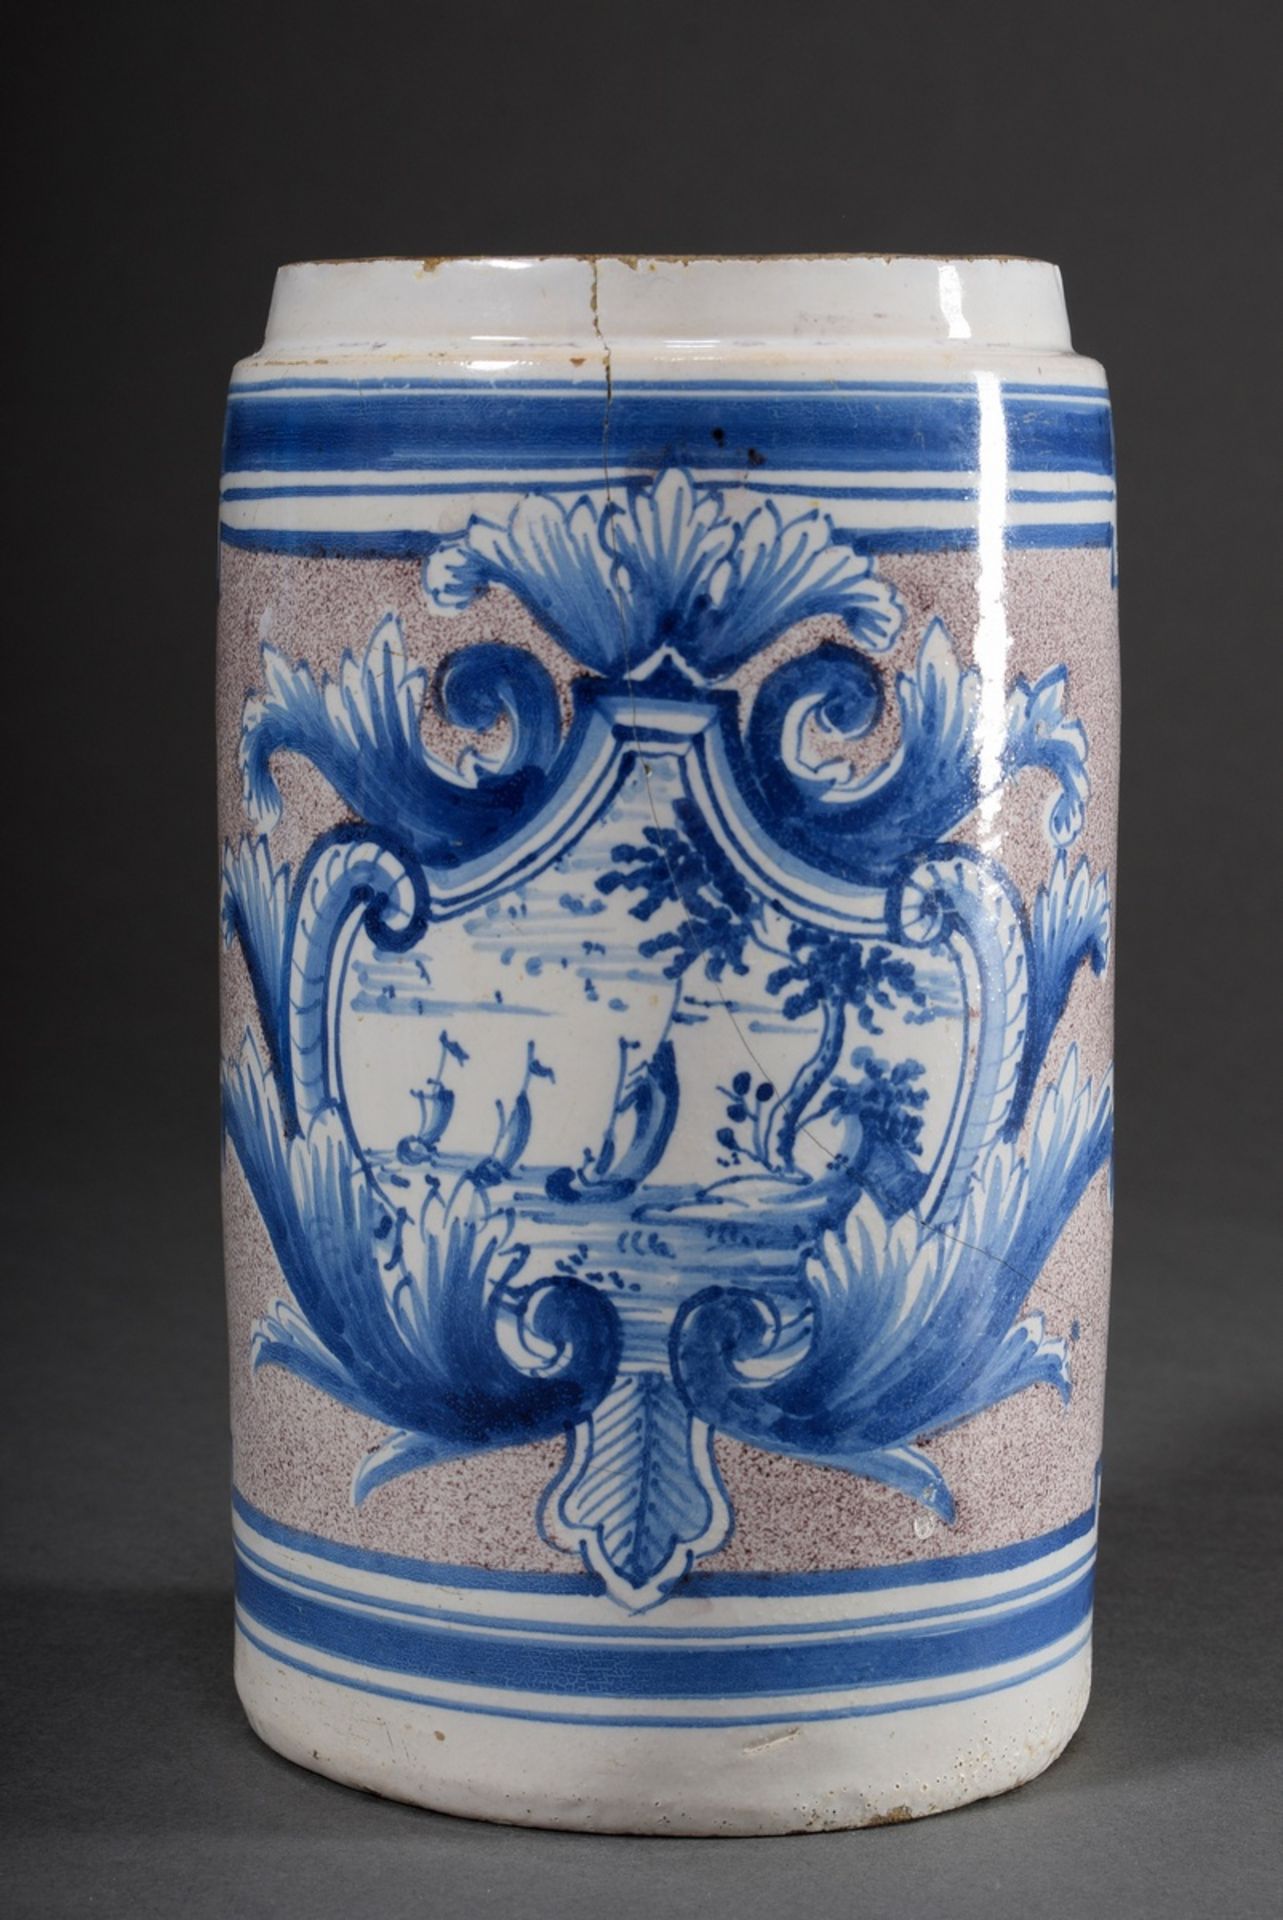 Faience cylindrical jug with blue painting decor "Sailboats in front of the coast" in floral cartou - Image 2 of 8